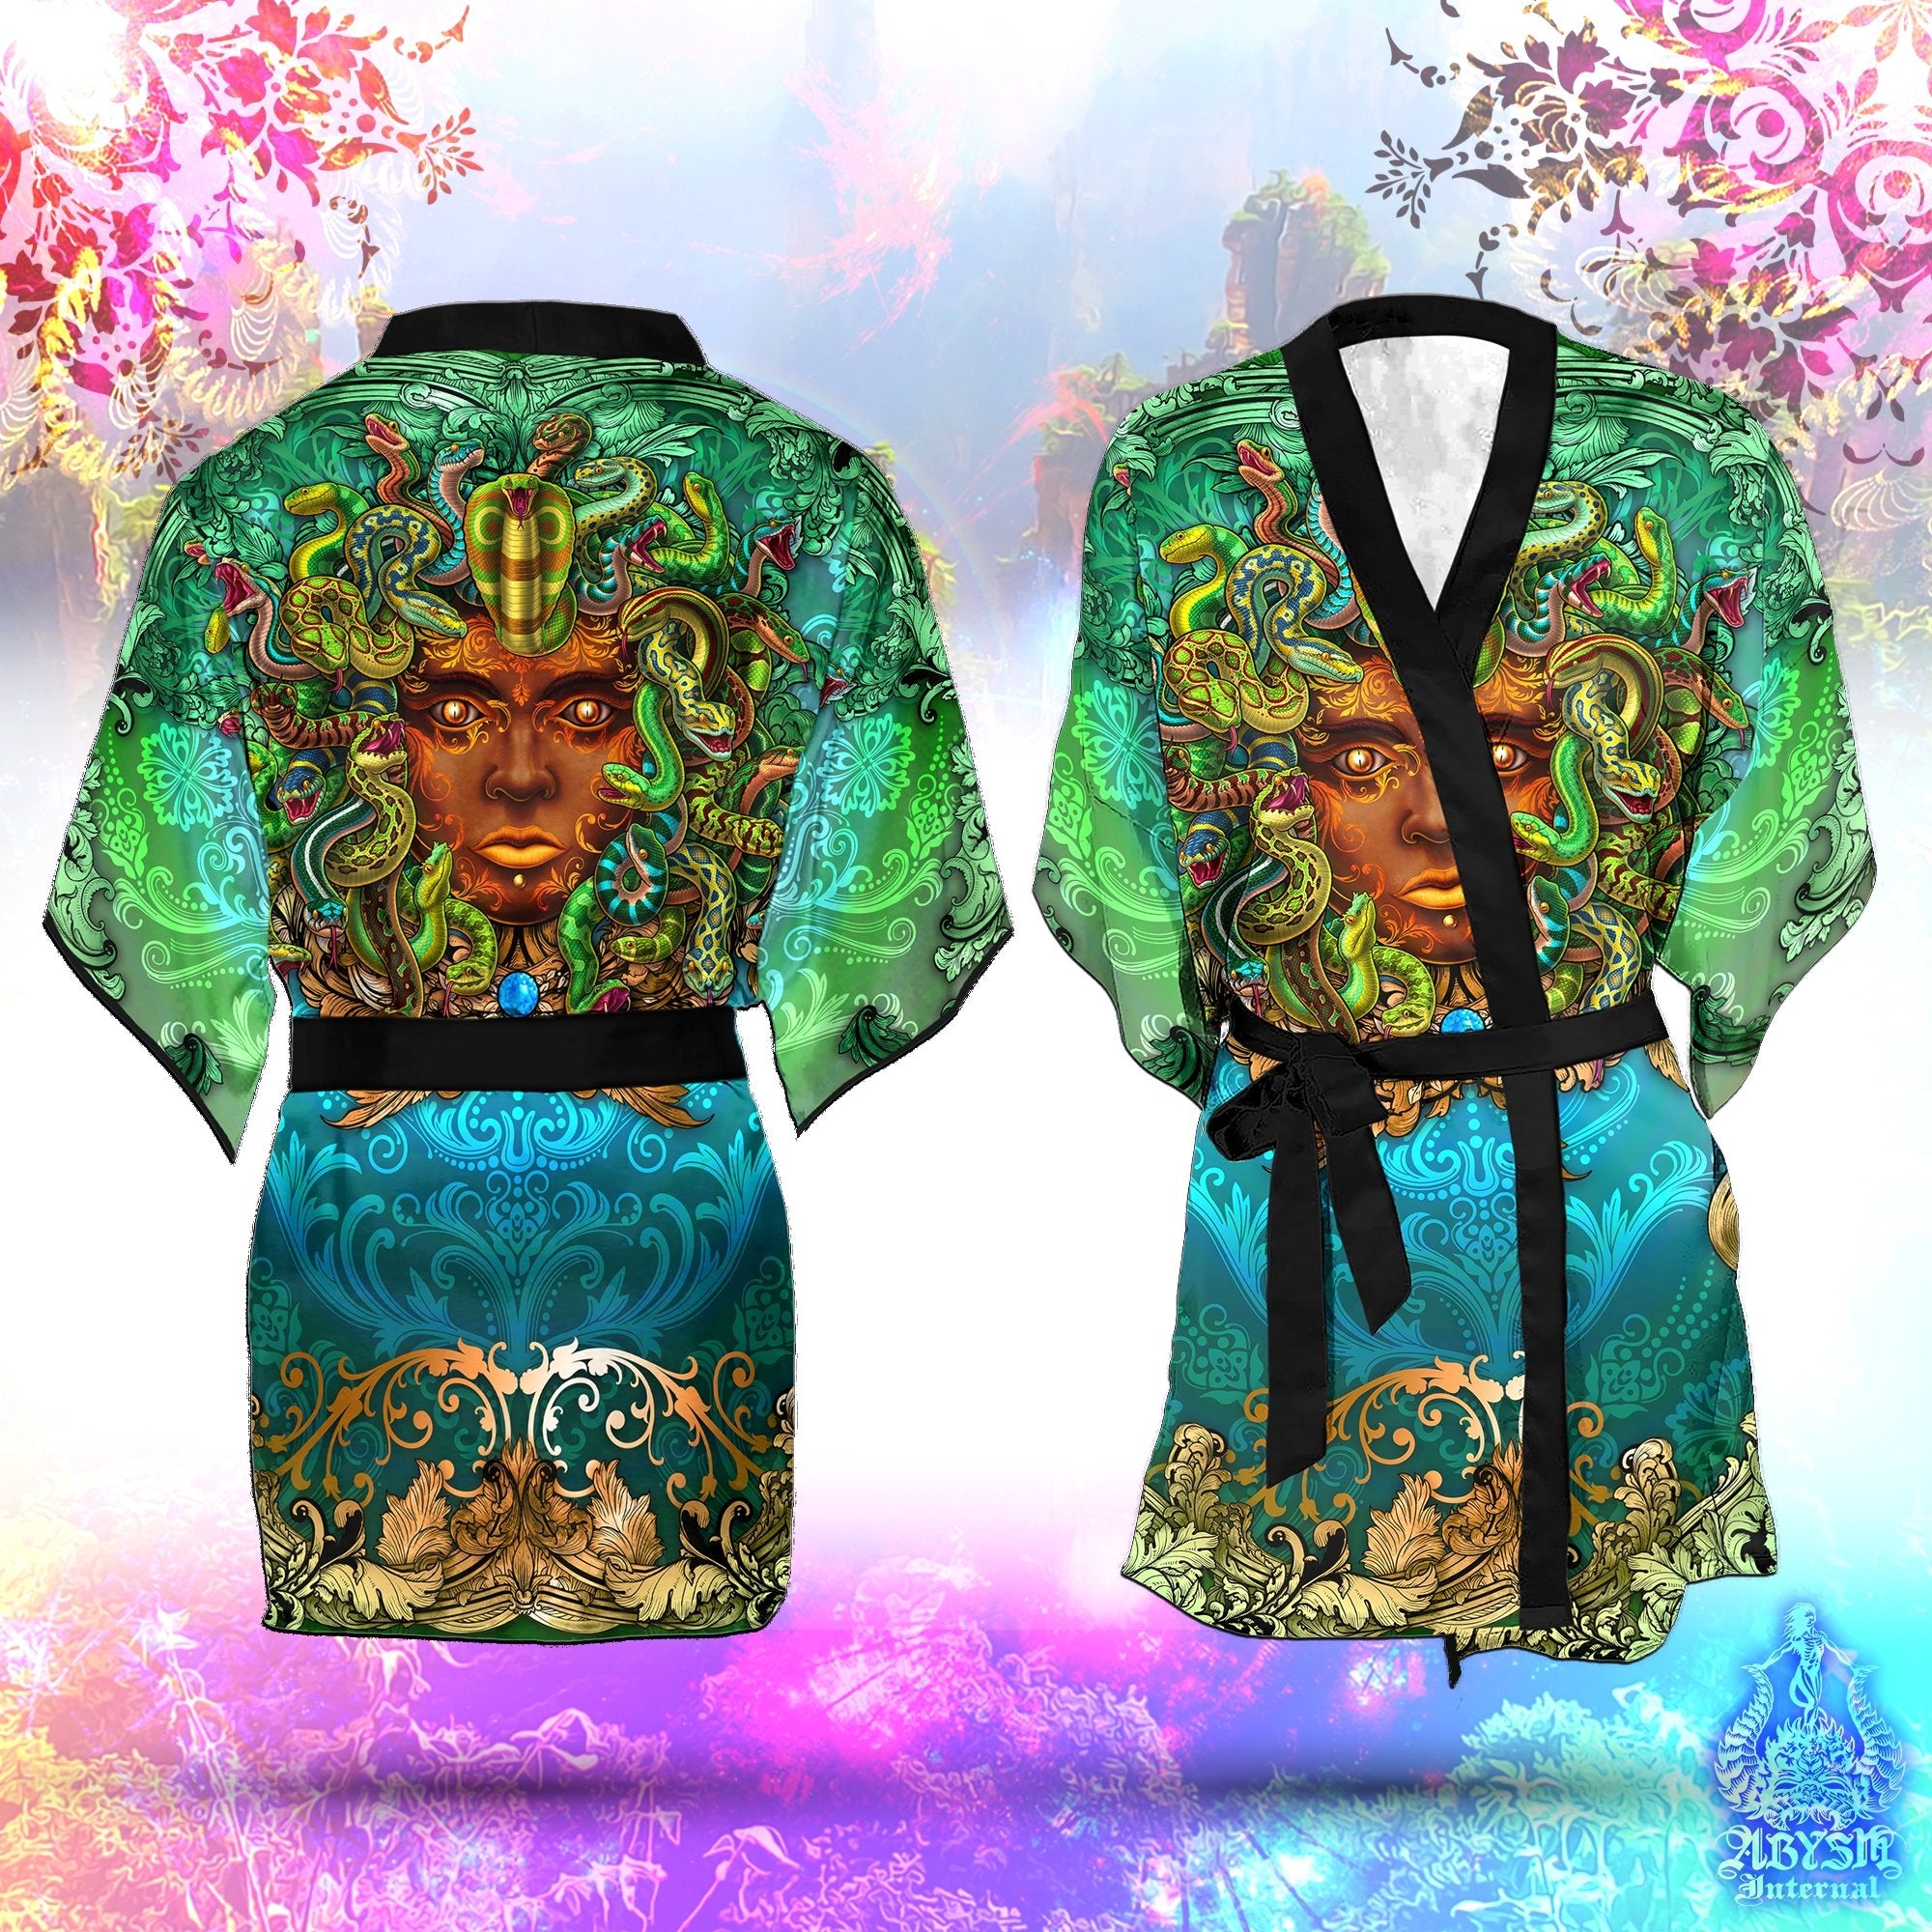 Medusa Cover Up, Beach Outfit, Party Kimono, Summer Festival Robe, Indie and Alternative Clothing, Unisex - Nature - Abysm Internal